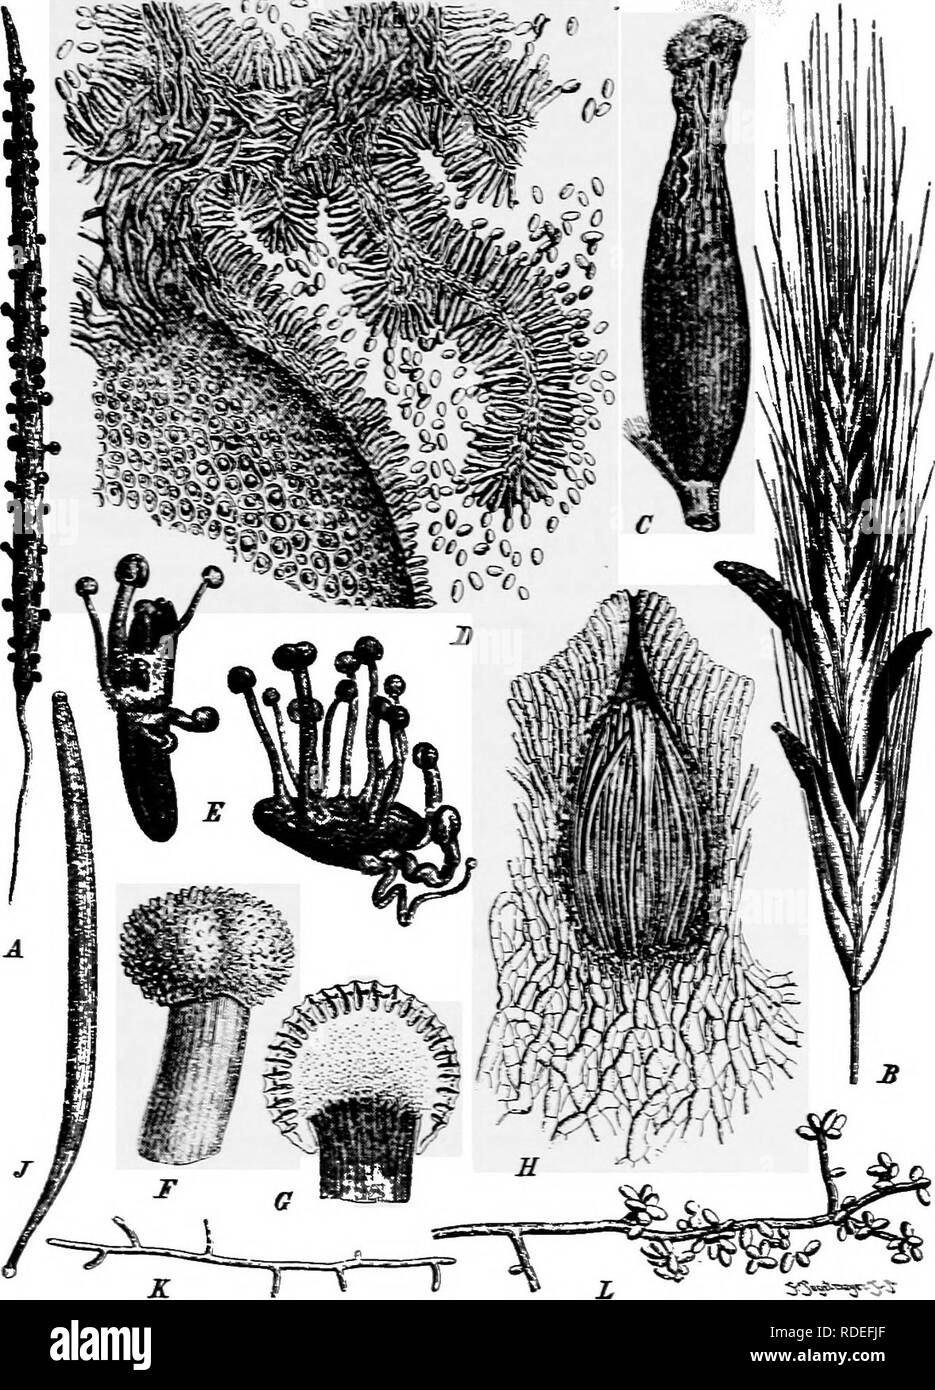 . A text-book of mycology and plant pathology . Plant diseases; Fungi in agriculture; Plant diseases; Fungi. MILDEWS AND RELATED FUNGI l6l. Fig. 57-—.4, Balansia claviceps on car of Paspalum; B—L, Claviceps purpurea; B, sclerotiuin; C, sclerotium with Sphacelia; D, cross-section of sphacelial layer; £, sprouting sclerotiiun; F, head of stroma from sclerotium; G, section of same; H, section of perithecium; J, ascus; /C, germinating ascospore; C, conidiospores pro- duced on myceliiiin. {See Die naturlichen PJianzenfatnili^n I. i, p. 371.). Please note that these images are extracted from scanned Stock Photo